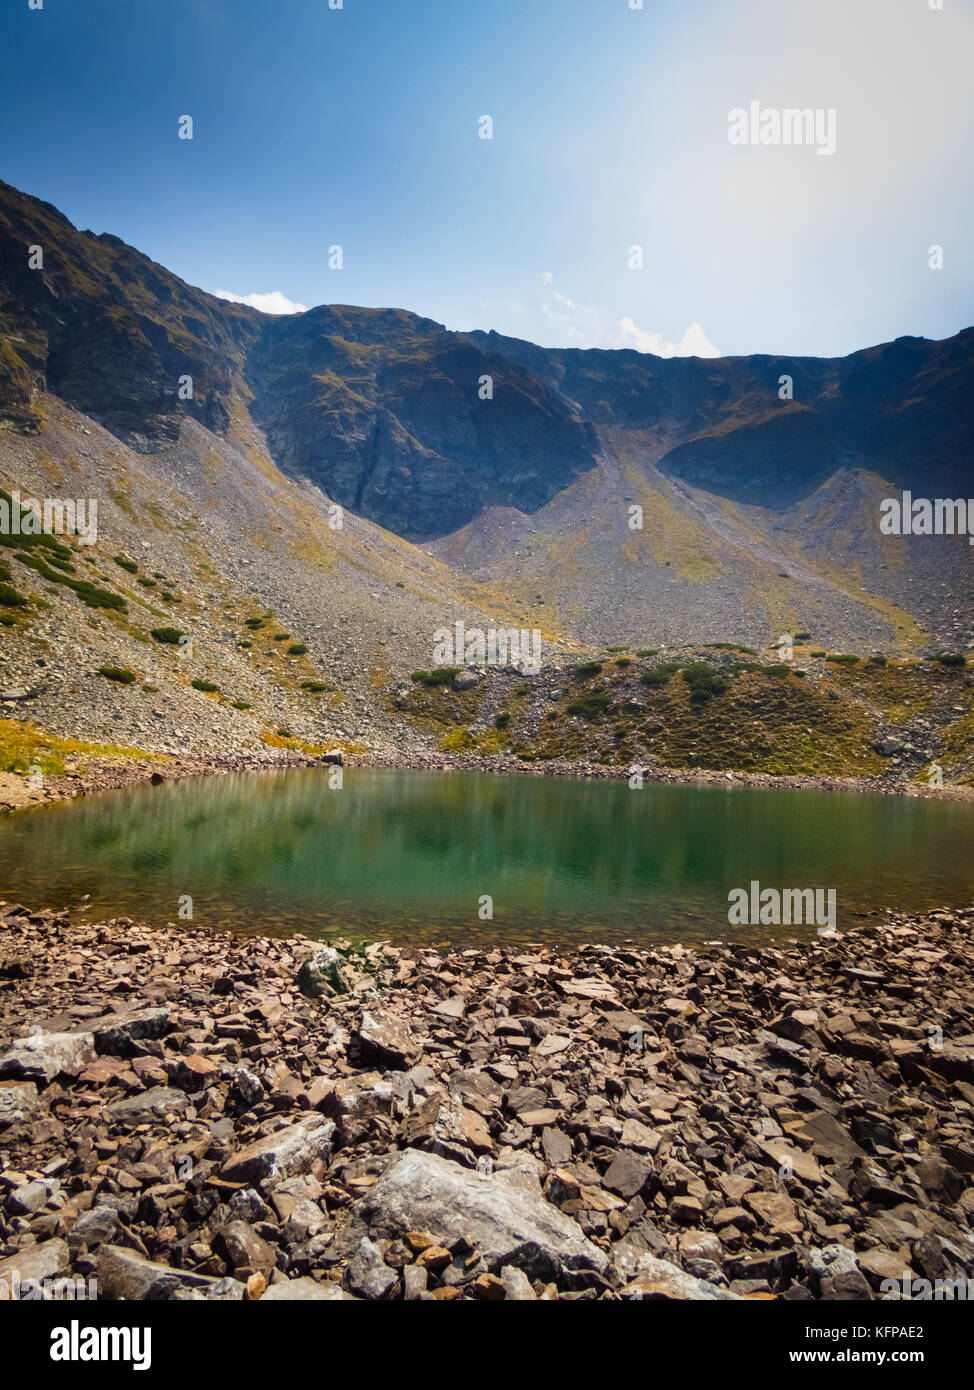 Rocks at the shore of a glacial lake high in the wilderness of the Carpathian Mountains. Stock Photo